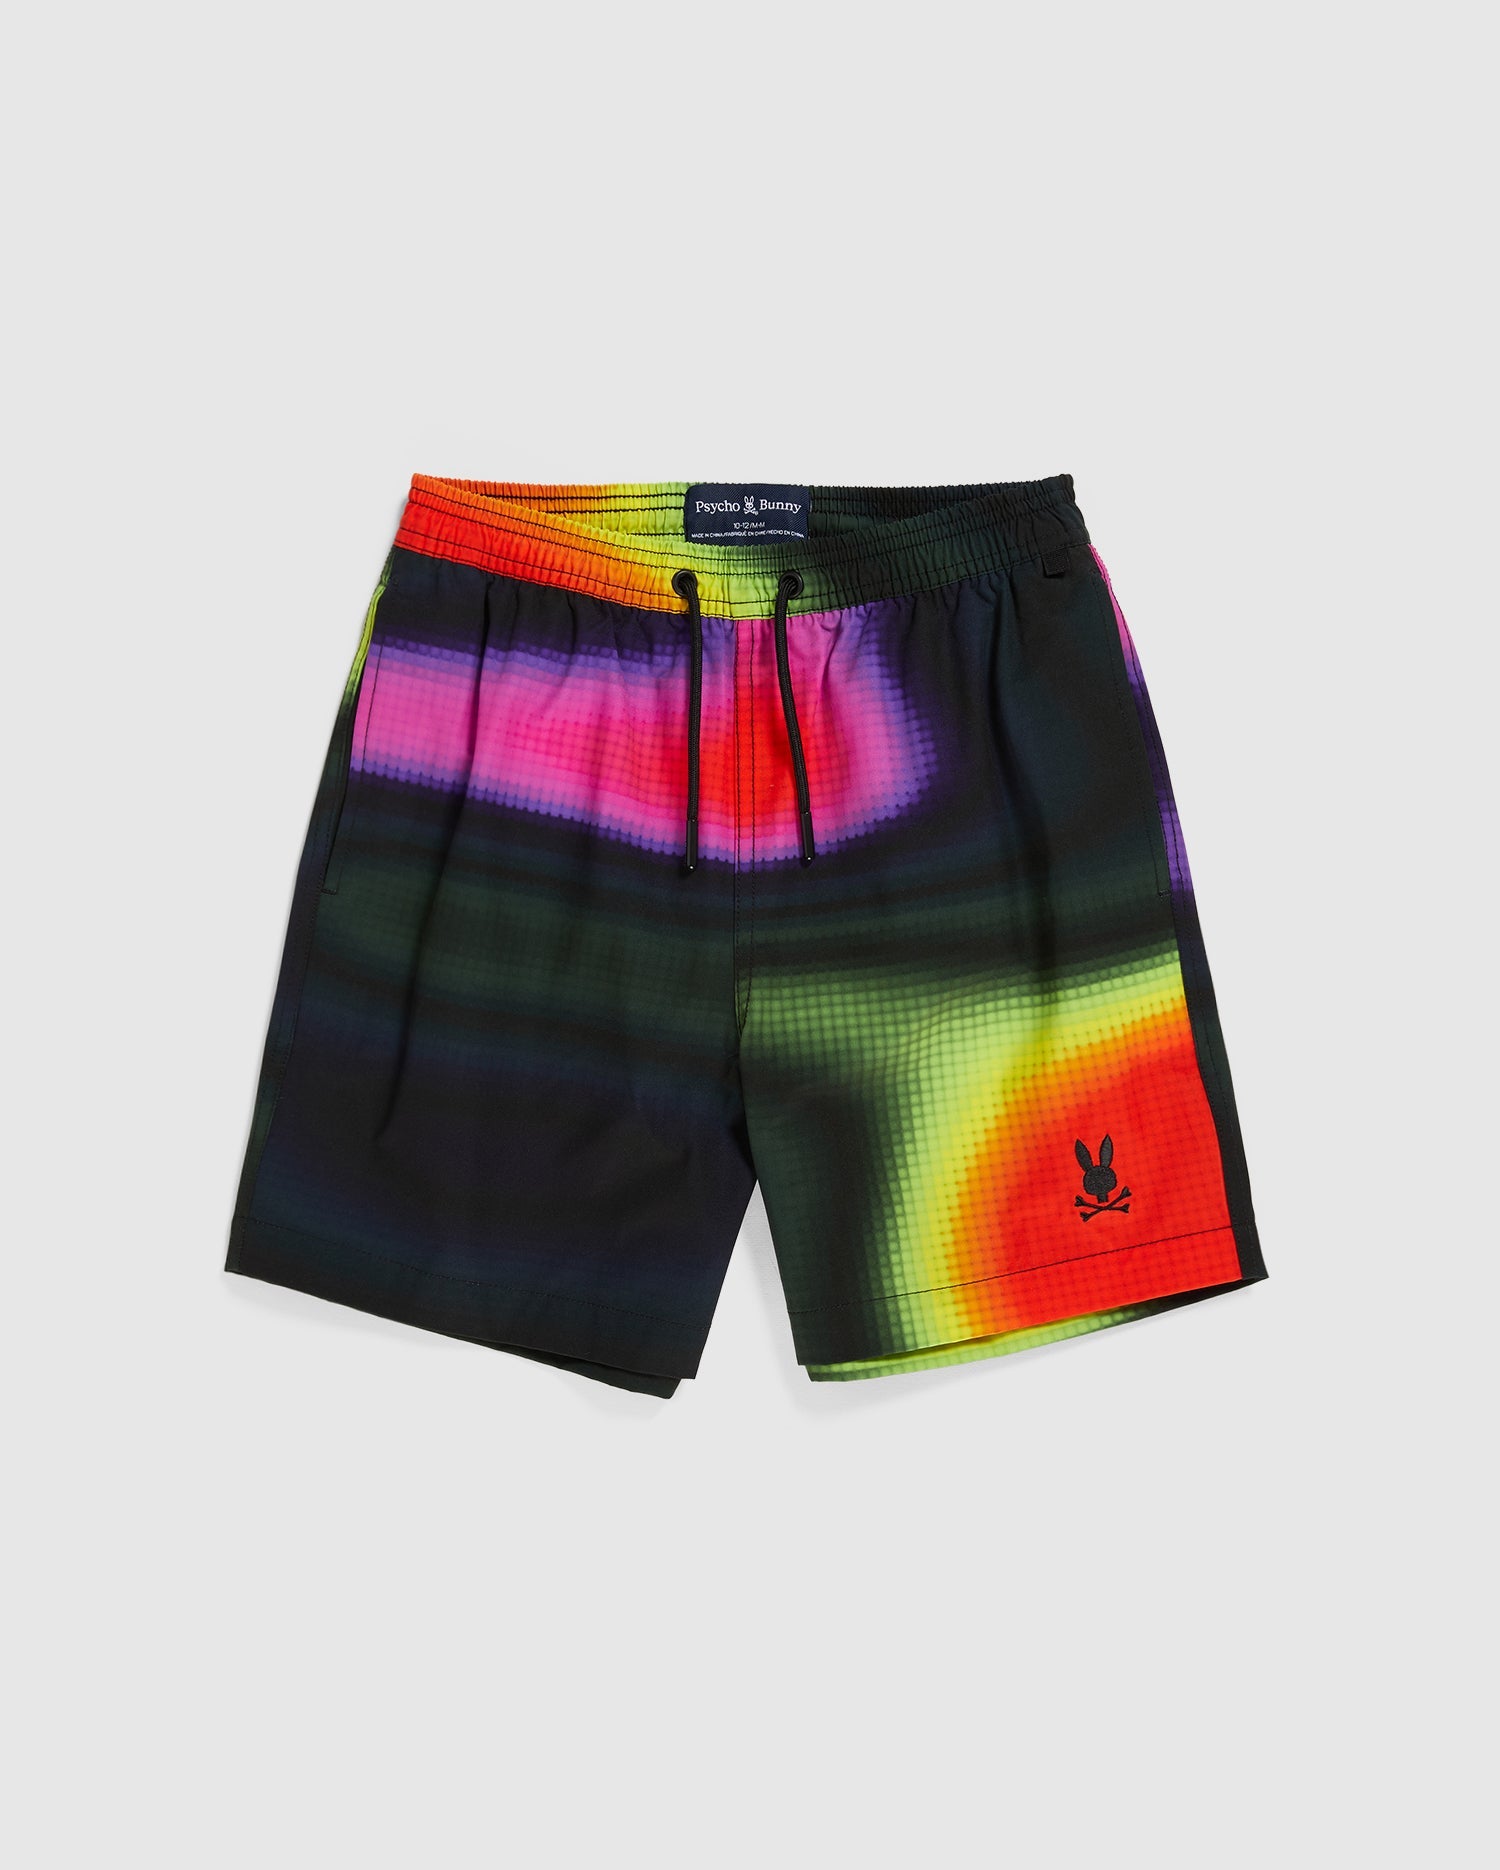 Color changing Psycho Bunny shorts, now available exclusively instore!  LIMITED QUANTITIES!